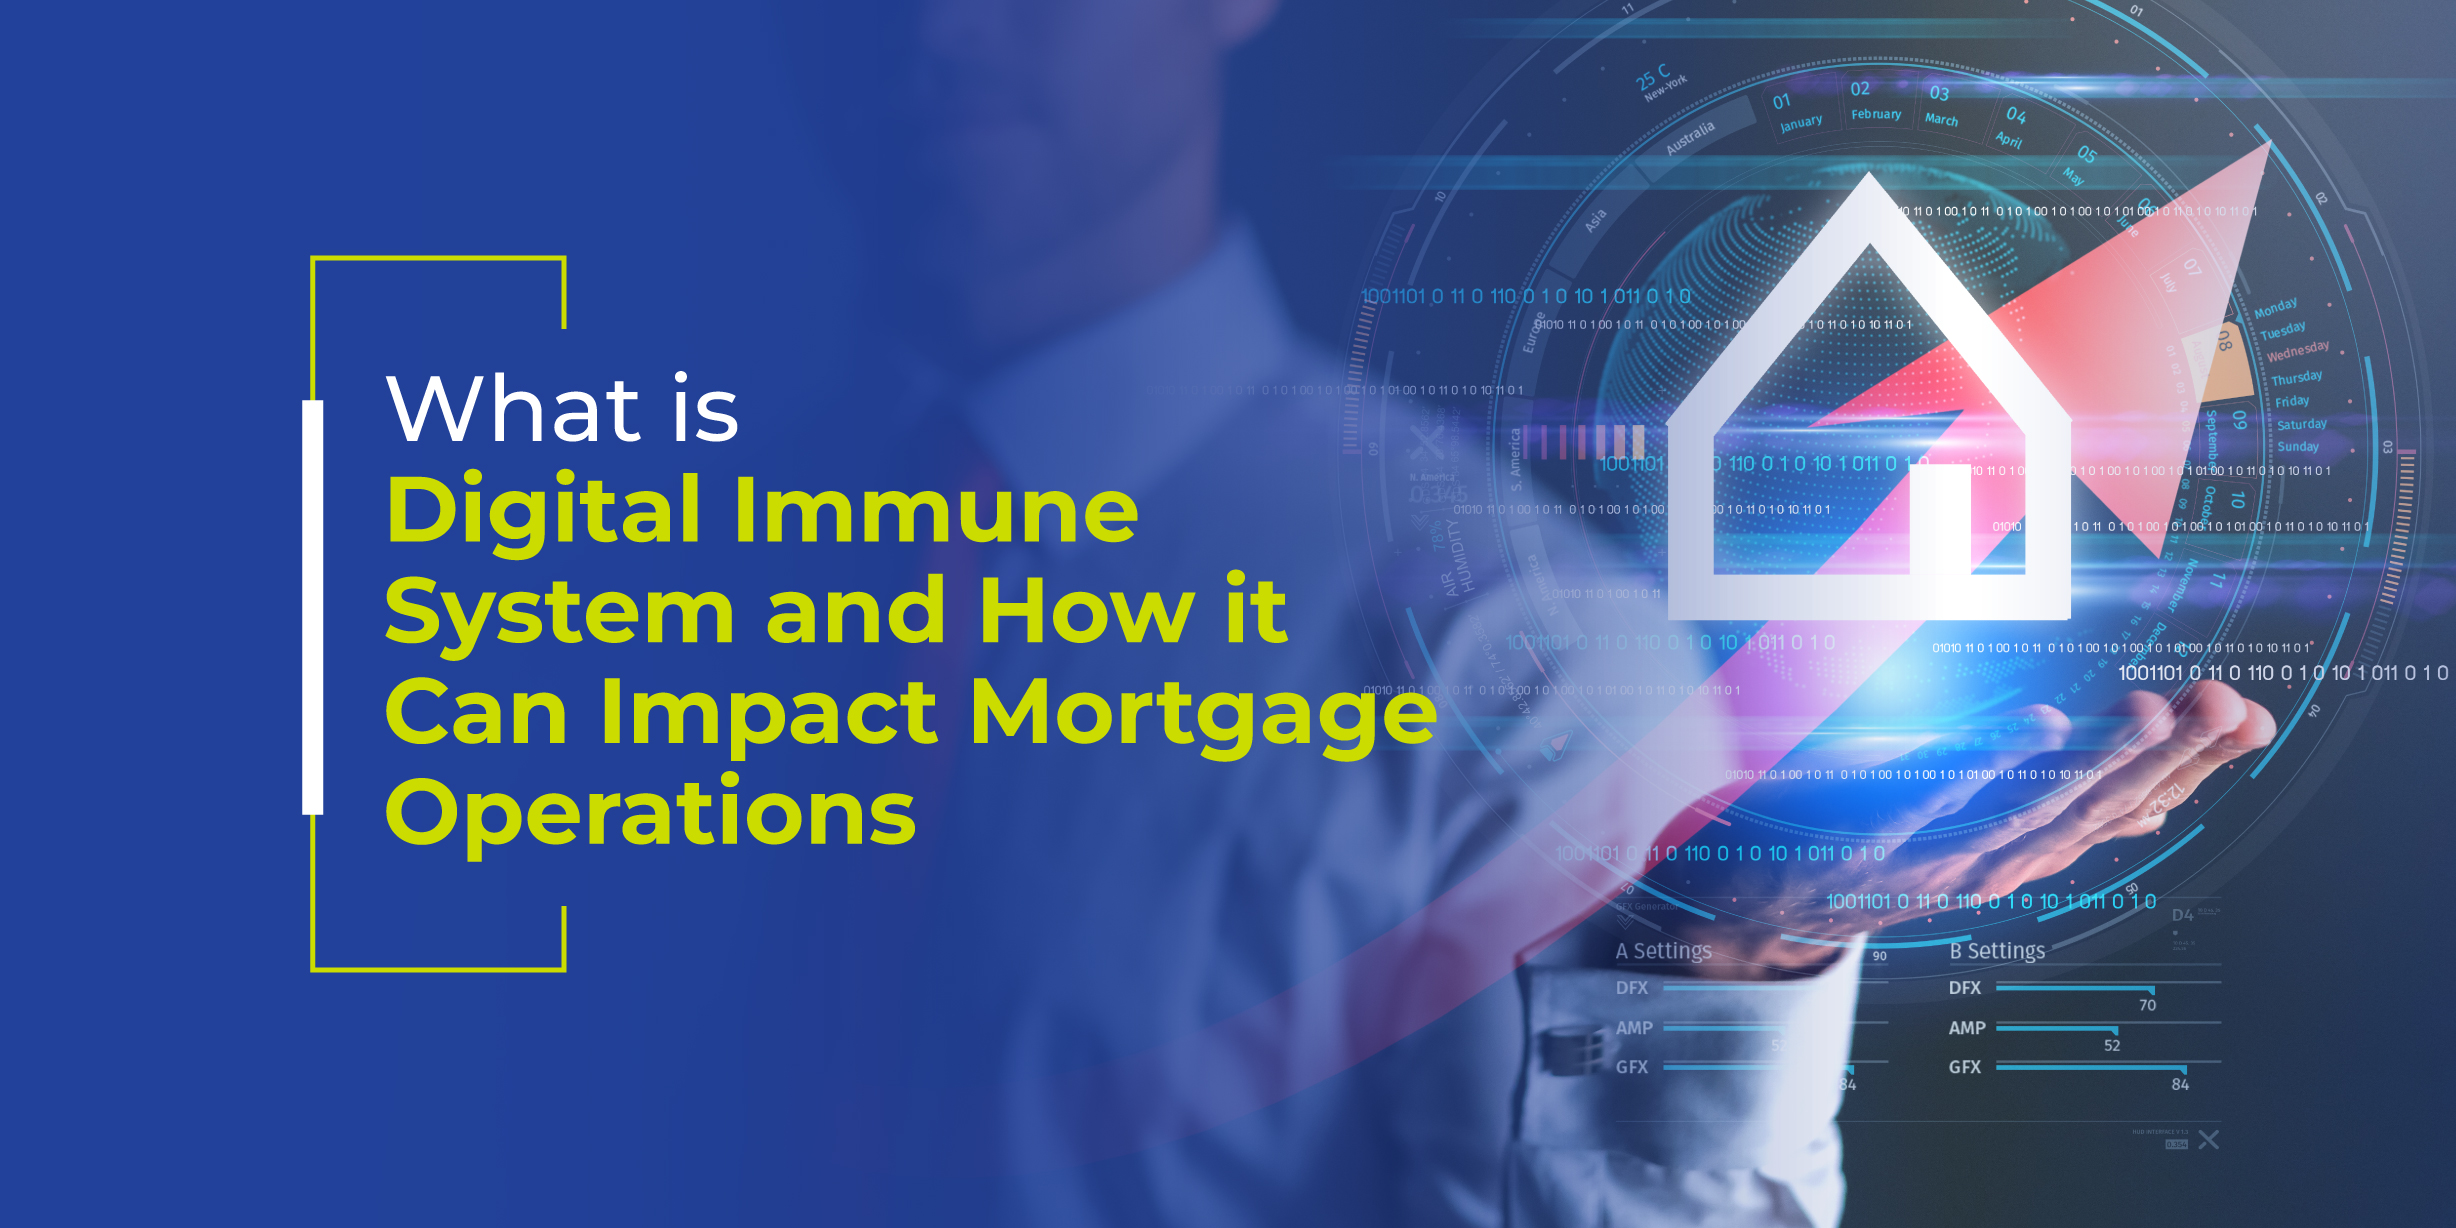 What is Digital Immune System and How it Can Impact Mortgage Operations